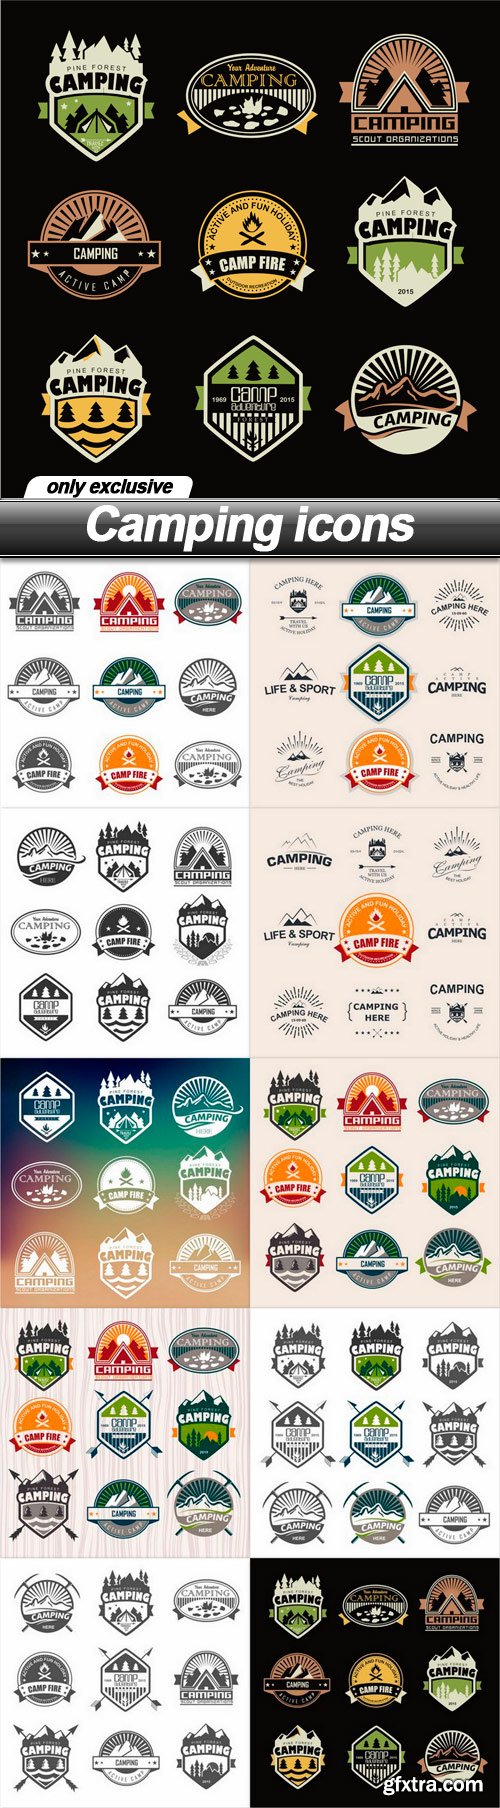 Camping icons - 10 EPS